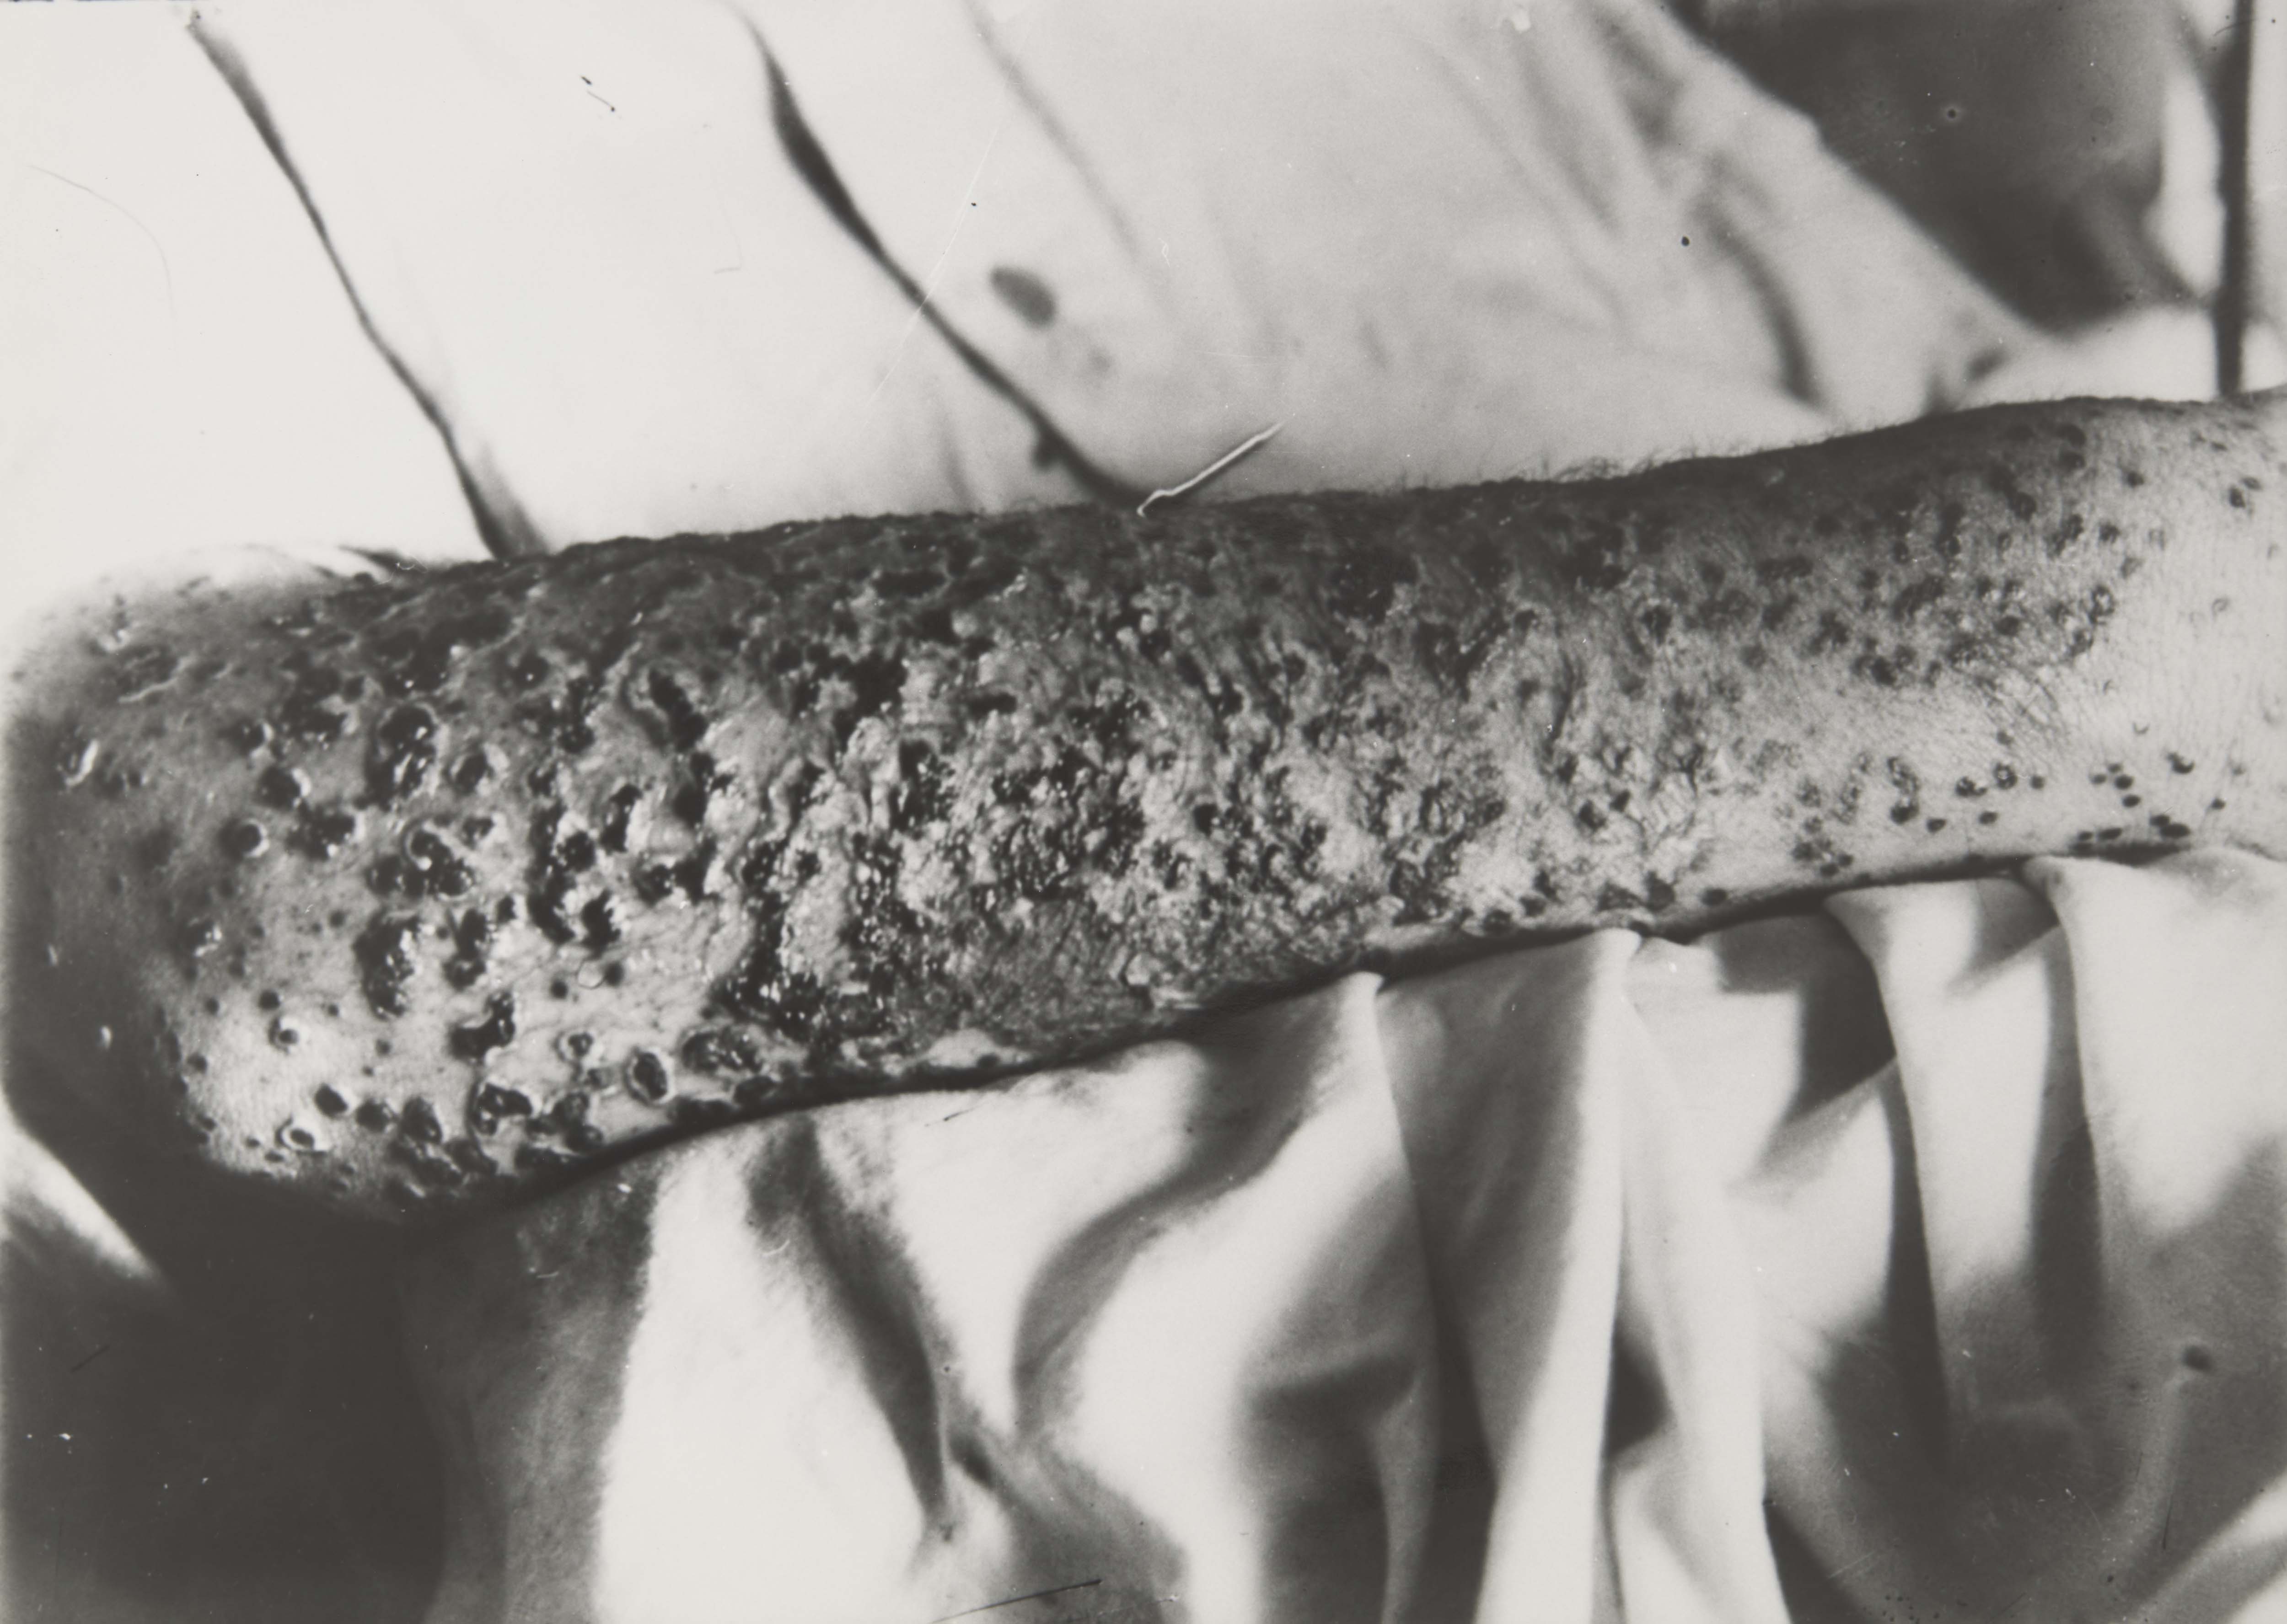 Photograph of the arm of a smallpox patient.